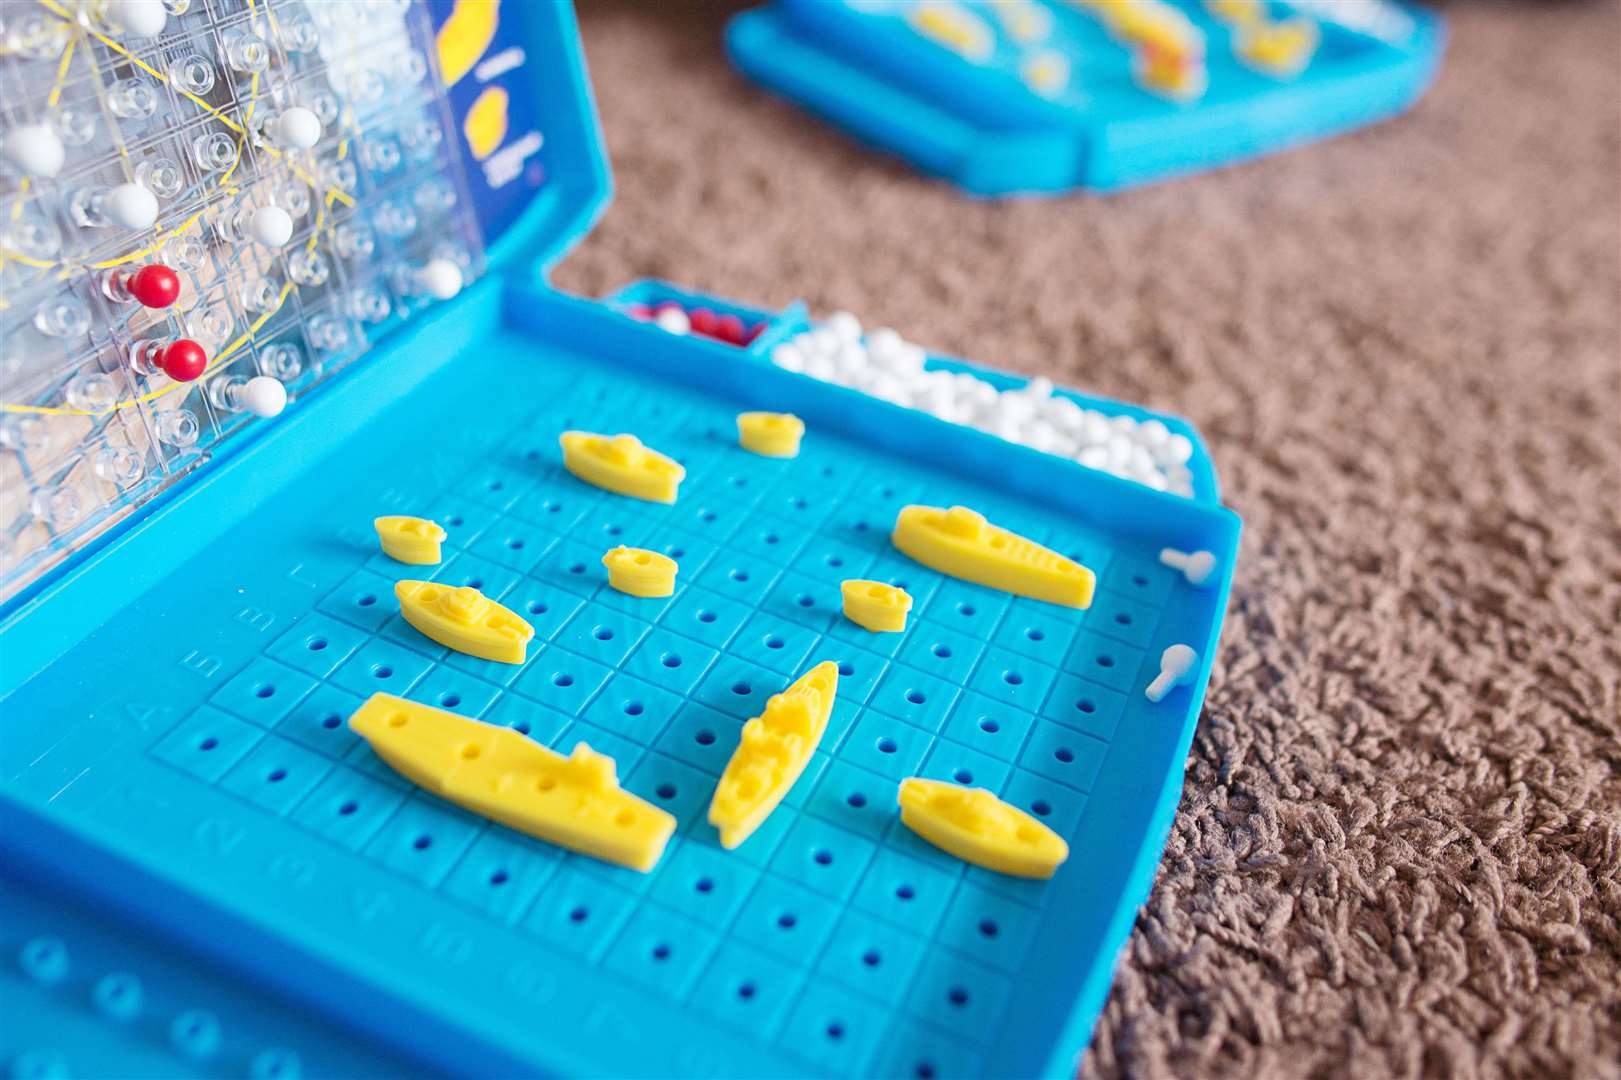 The classic two-player game, Battleship Picture: PA Photo